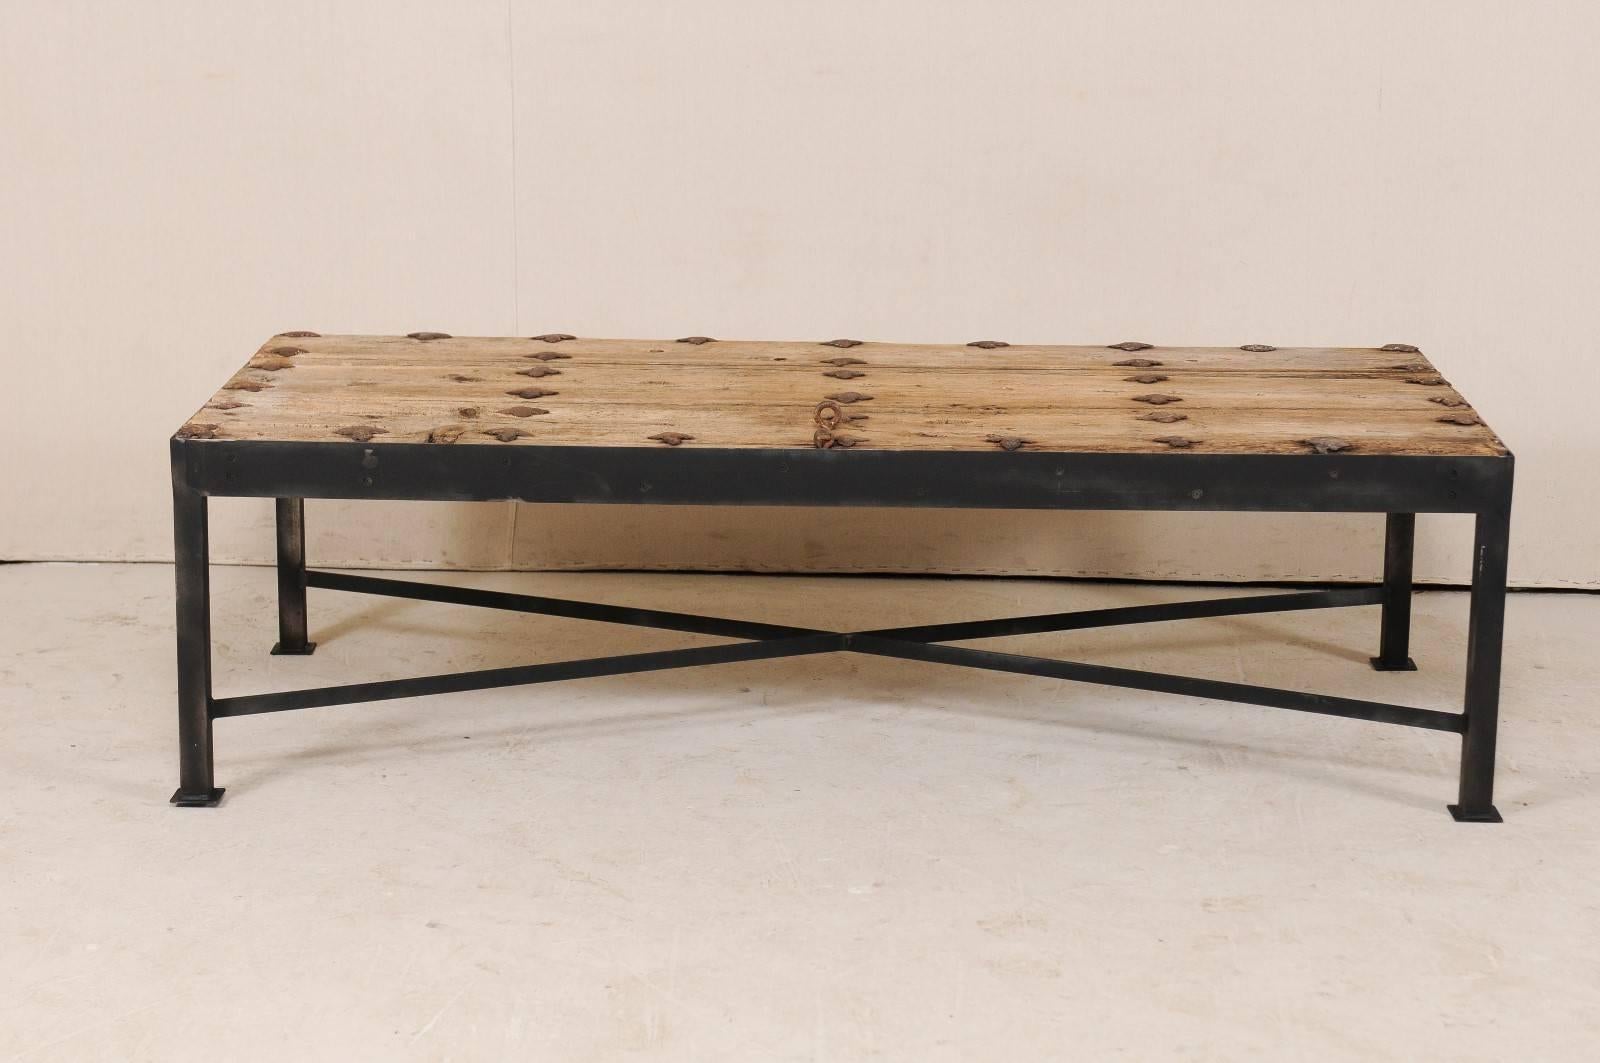 This is a custom coffee table made from an 18th century Spanish door. This fantastic coffee table has been fashioned from an 18th century Spanish door, with it's elongated wood planks adorn with their original rows of iron grommets and hardware, set